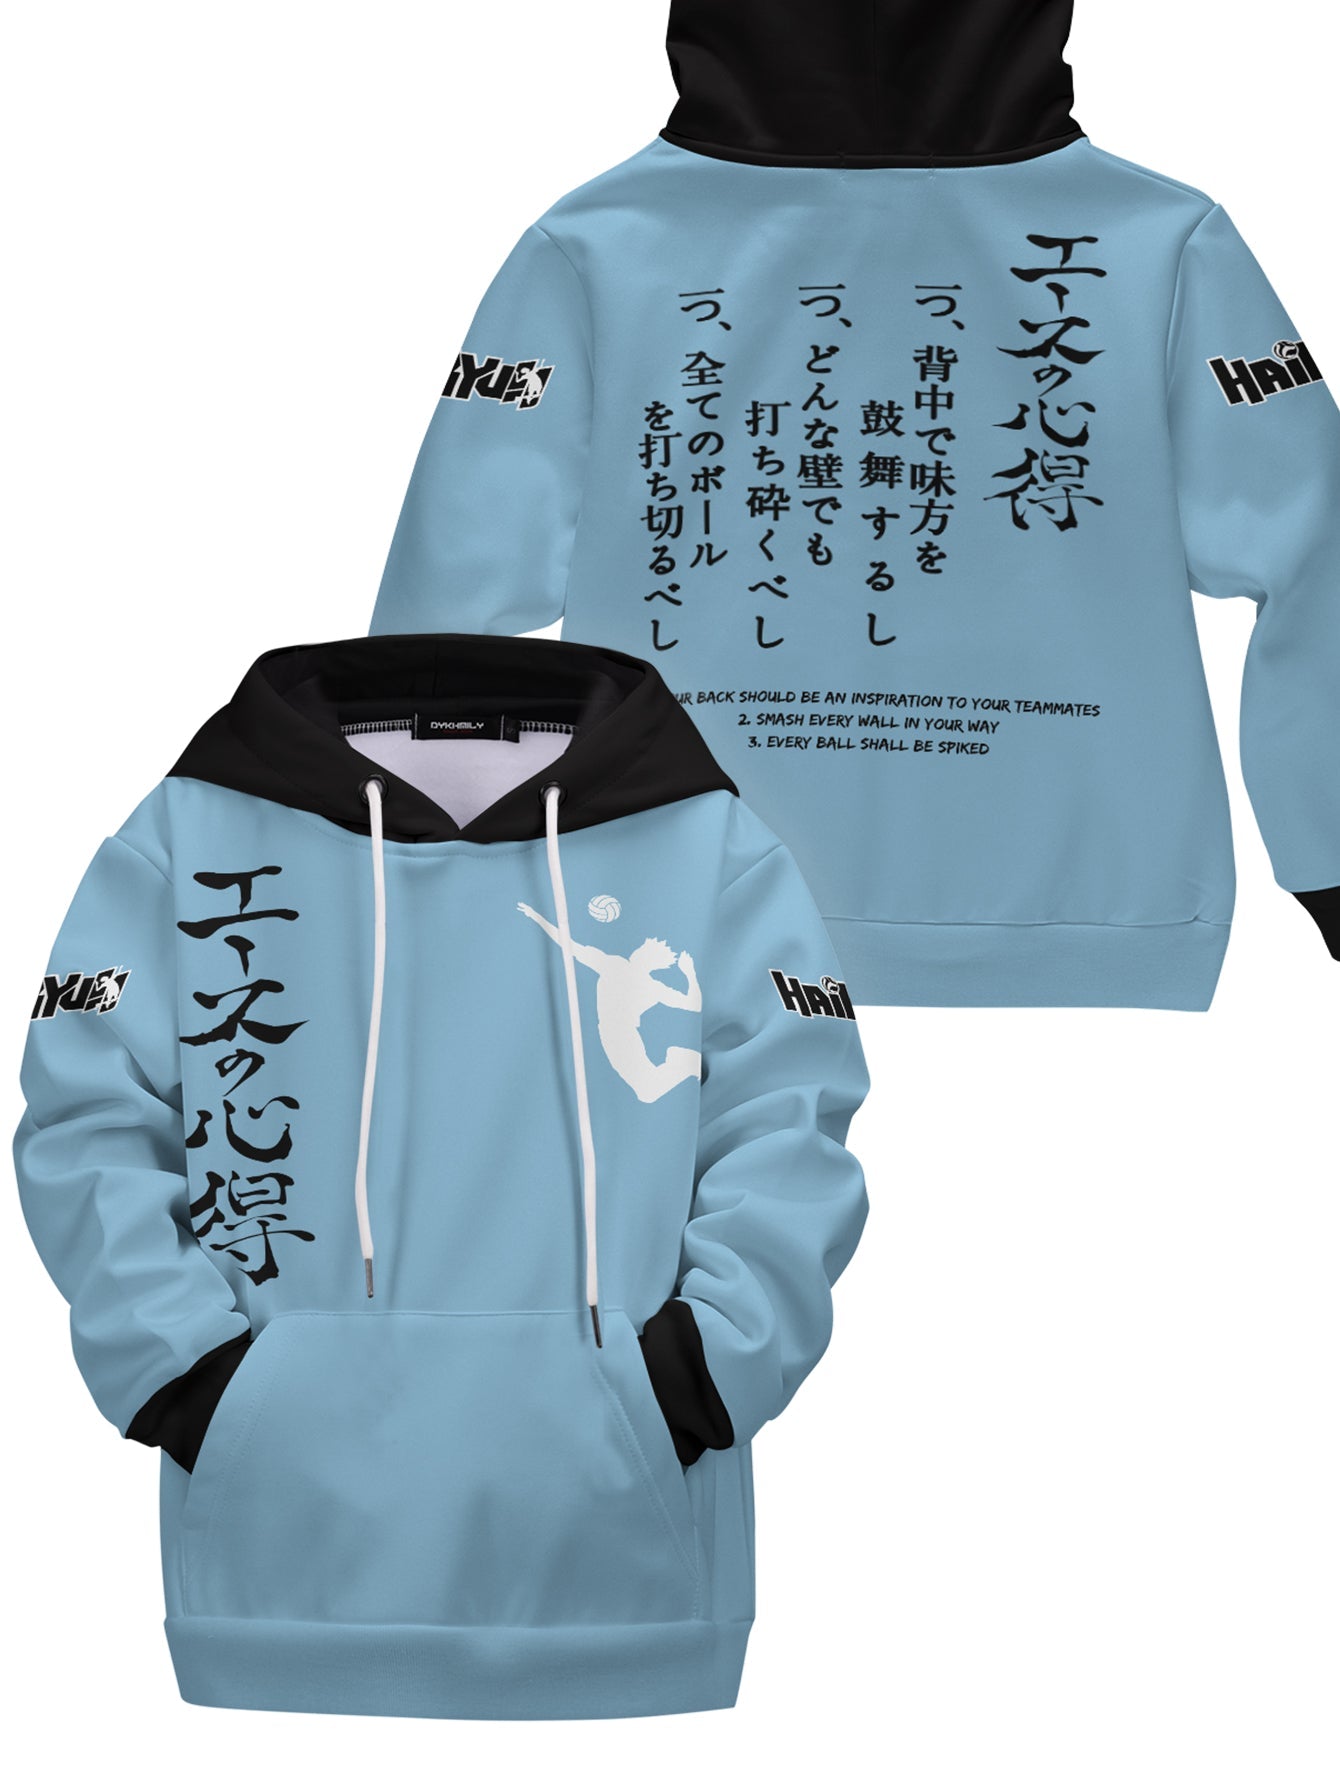 Fandomaniax - The Way of the Ace Kids Unisex Pullover Hoodie